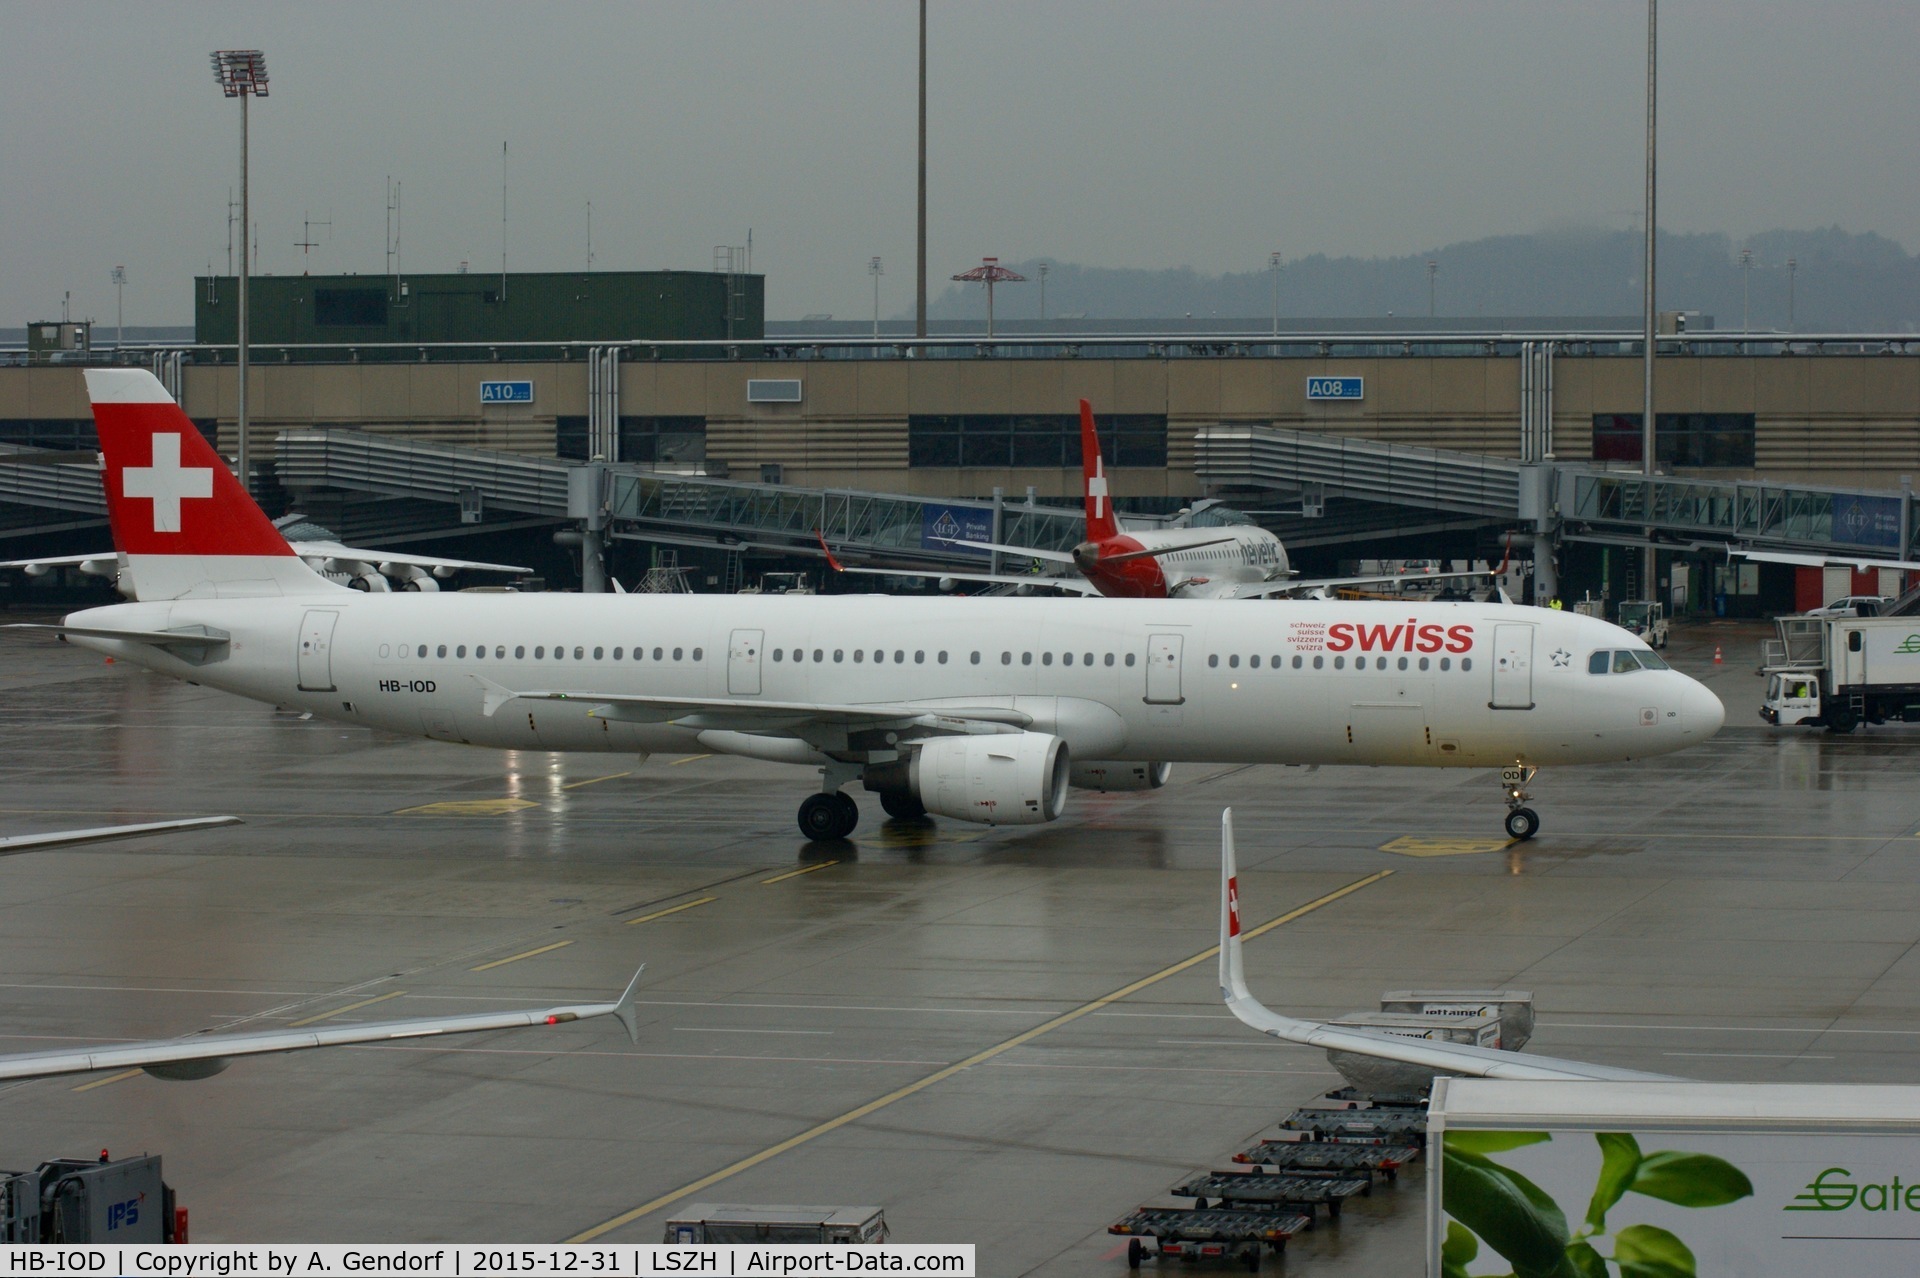 HB-IOD, 1995 Airbus A321-111 C/N 522, Swiss, is here searching for a free gate at Zürich-Kloten(LSZH)